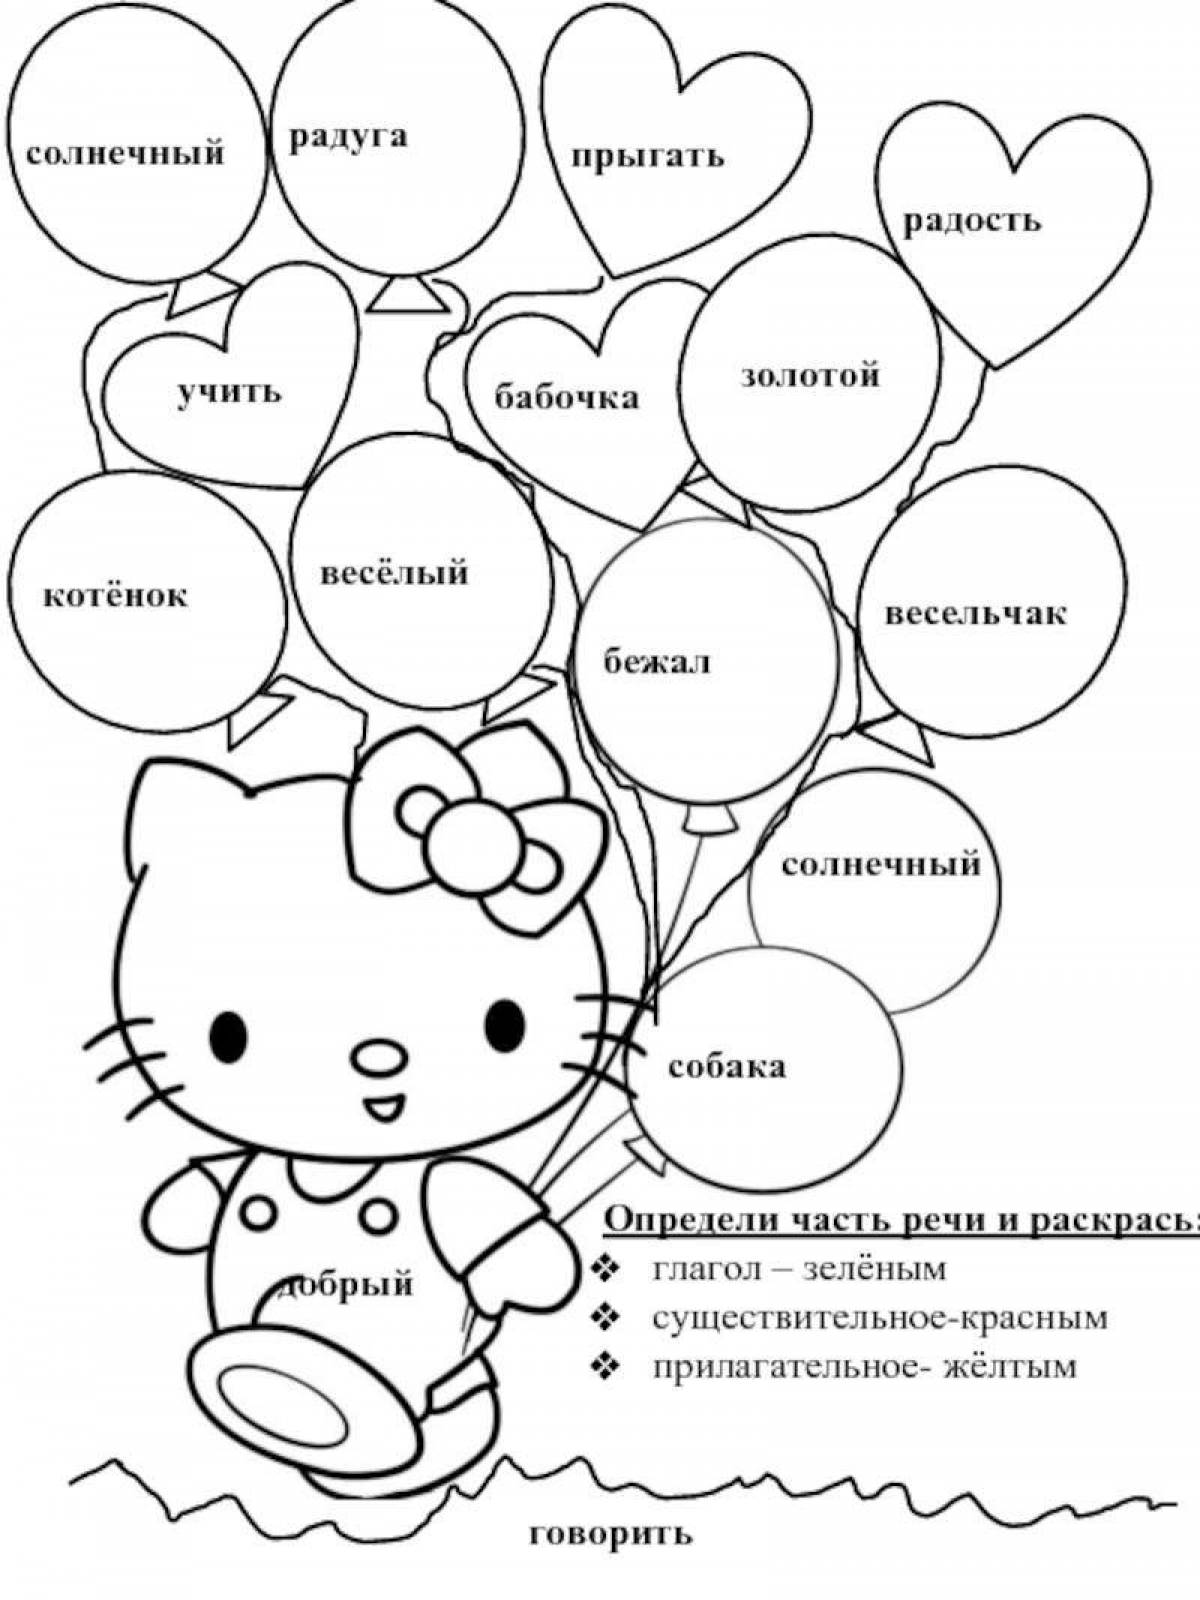 Entertaining coloring book in Russian, Grade 2 with assignments